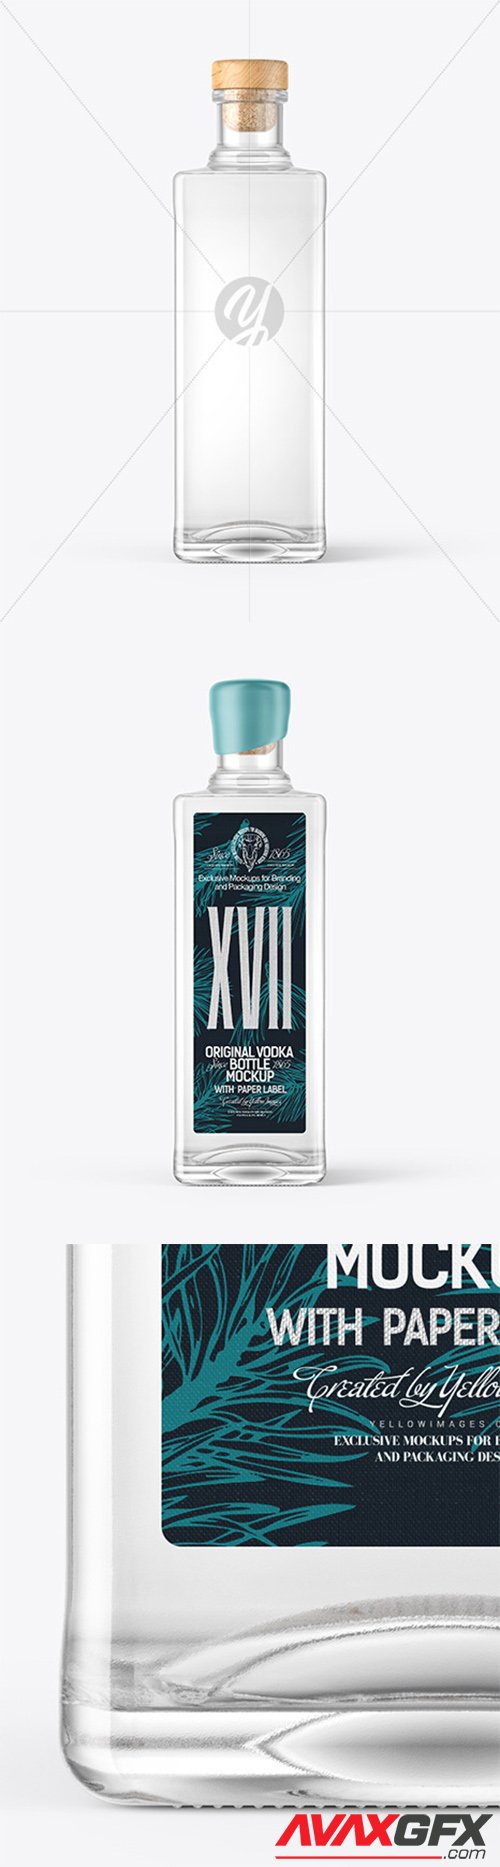 Download Bottle Avaxgfx All Downloads That You Need In One Place Graphic From Nitroflare Rapidgator Yellowimages Mockups